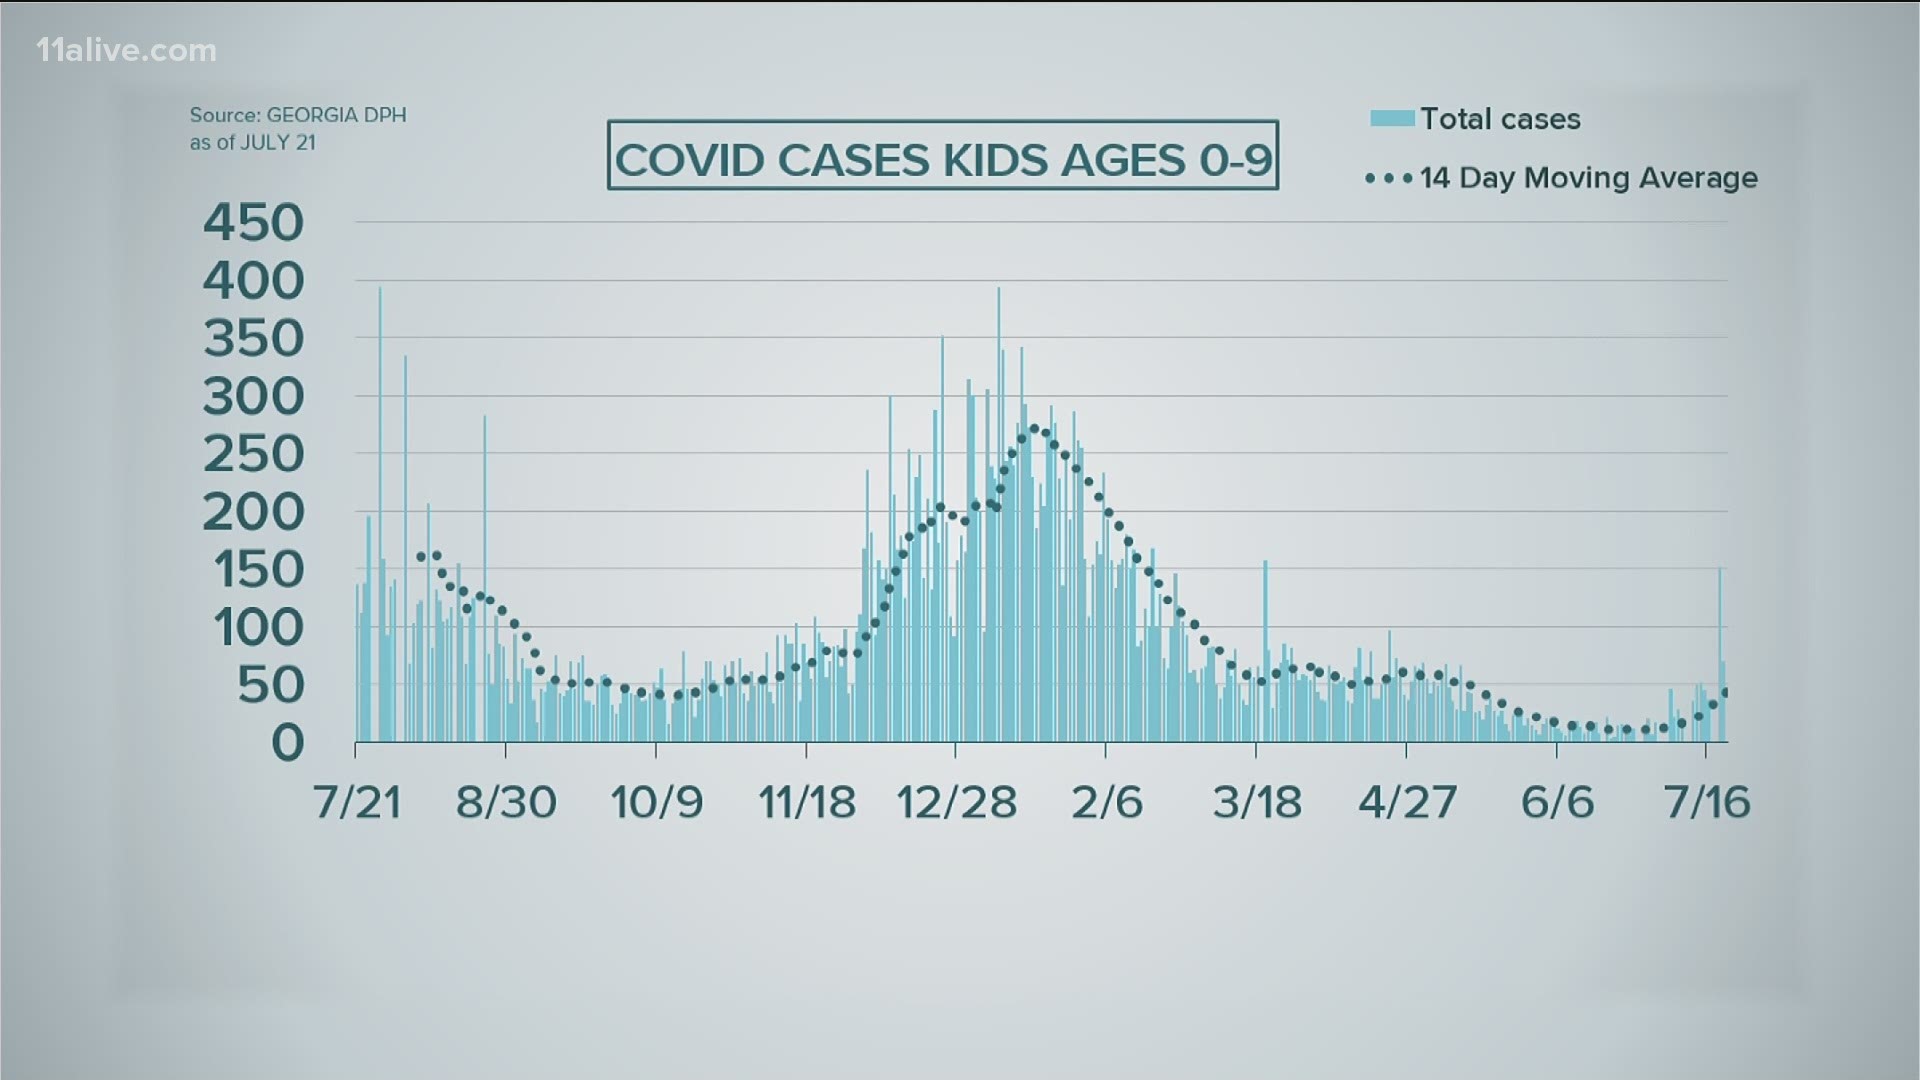 More cases are being seen among children.